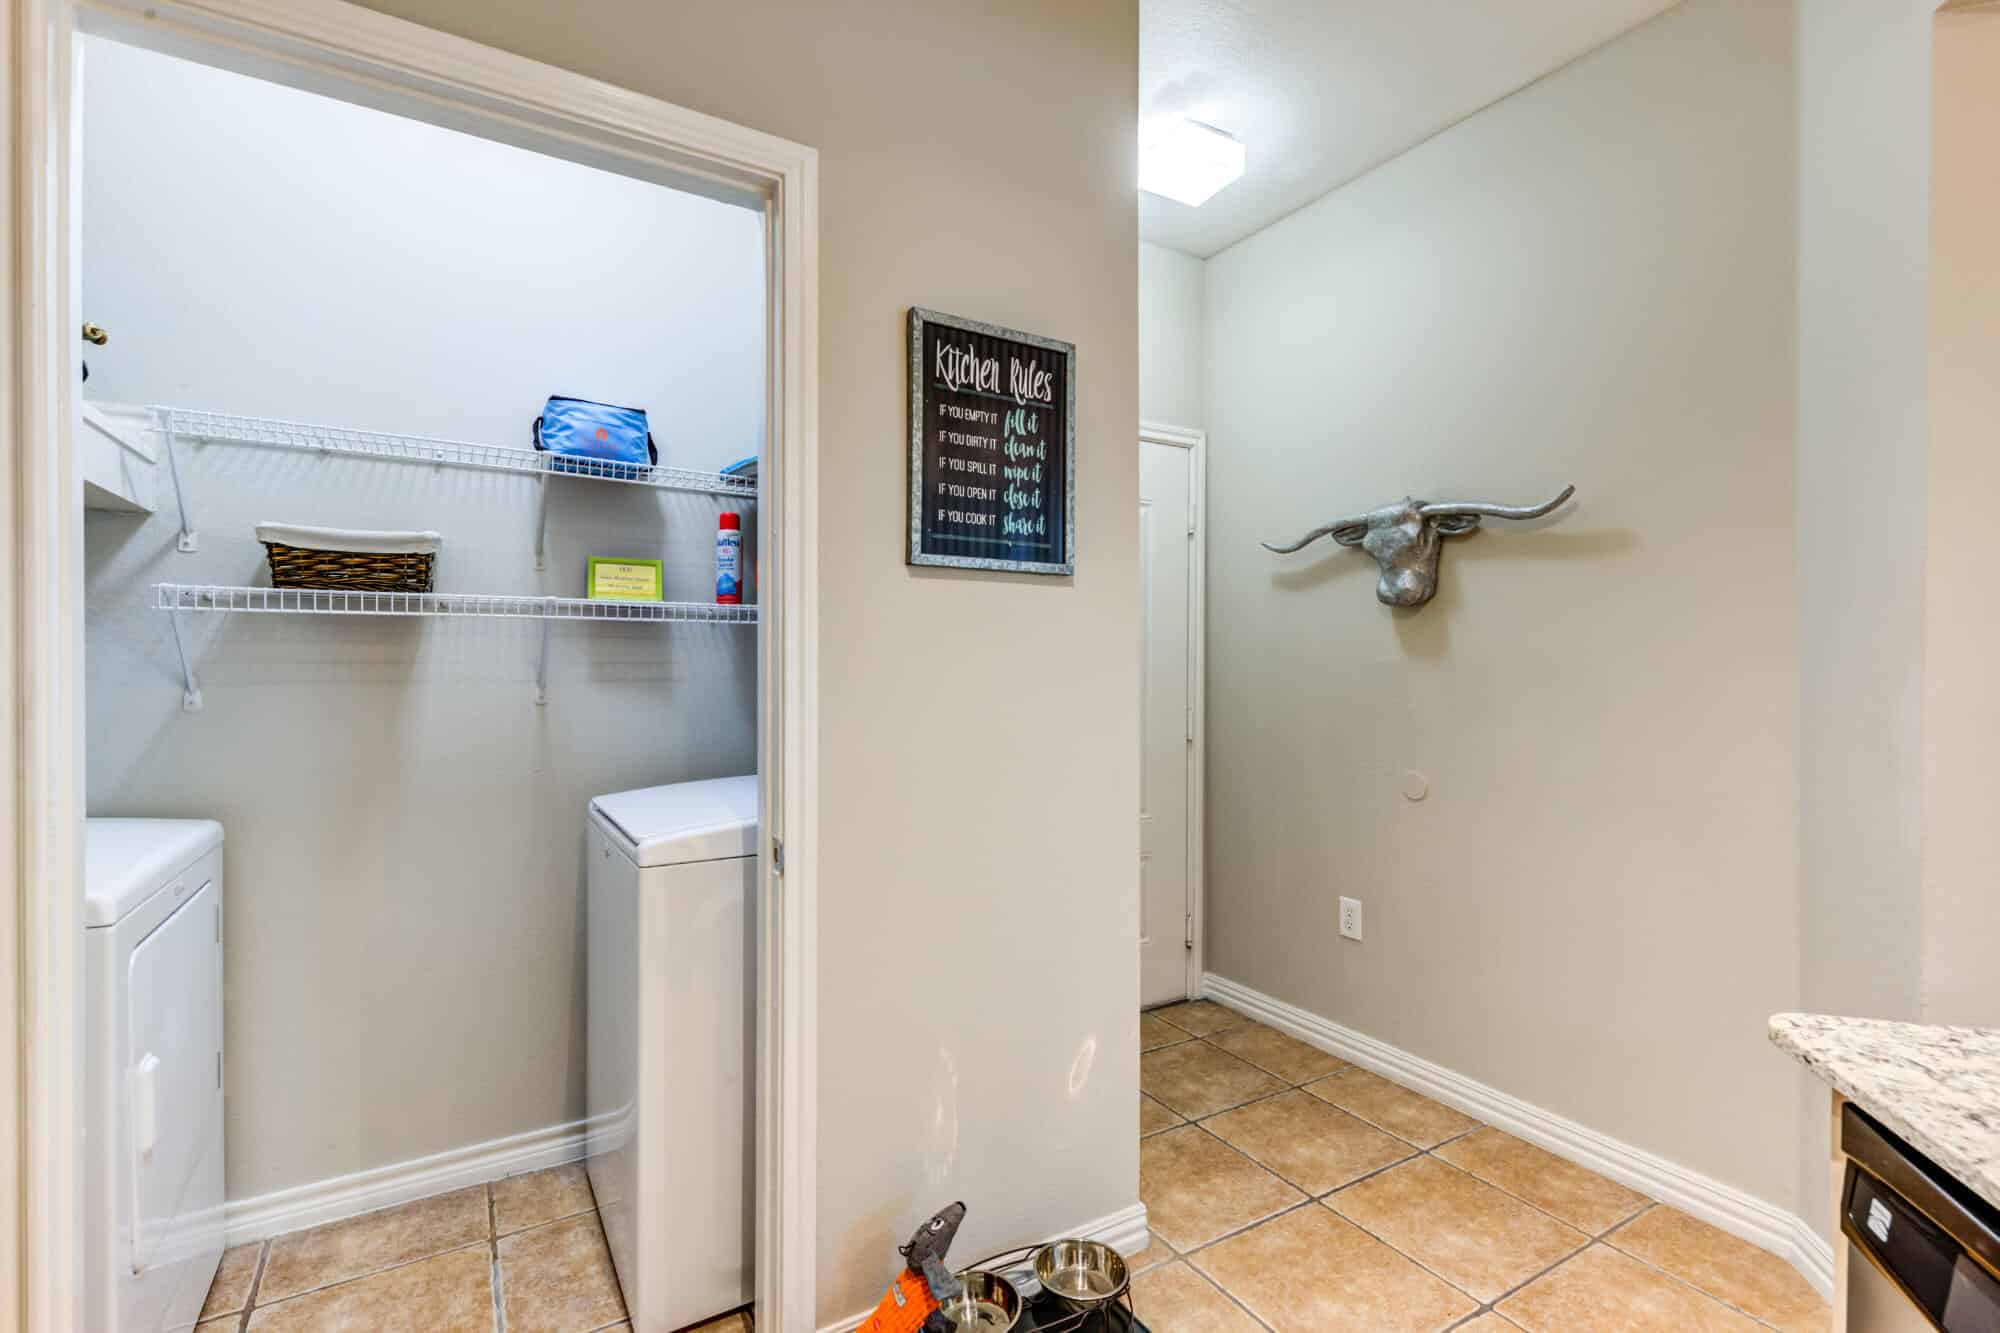 villas on guadalupe off campus apartments near ut austin laundry room in unit washer and dryer